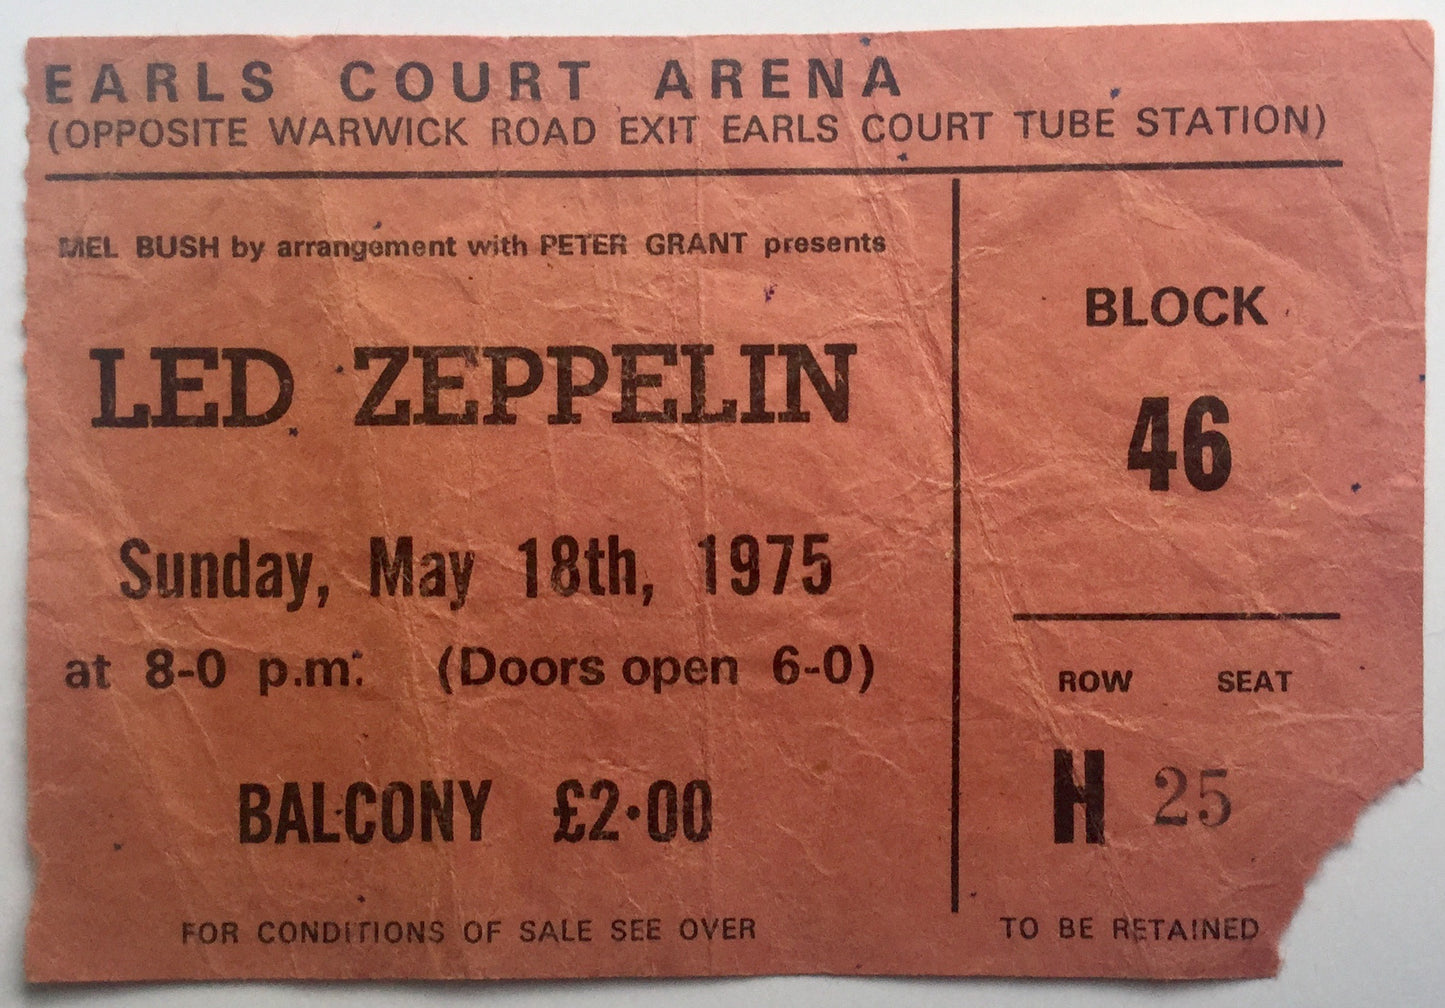 Led Zeppelin Original Used Concert Ticket Earls Court Arena London 18th May 1975